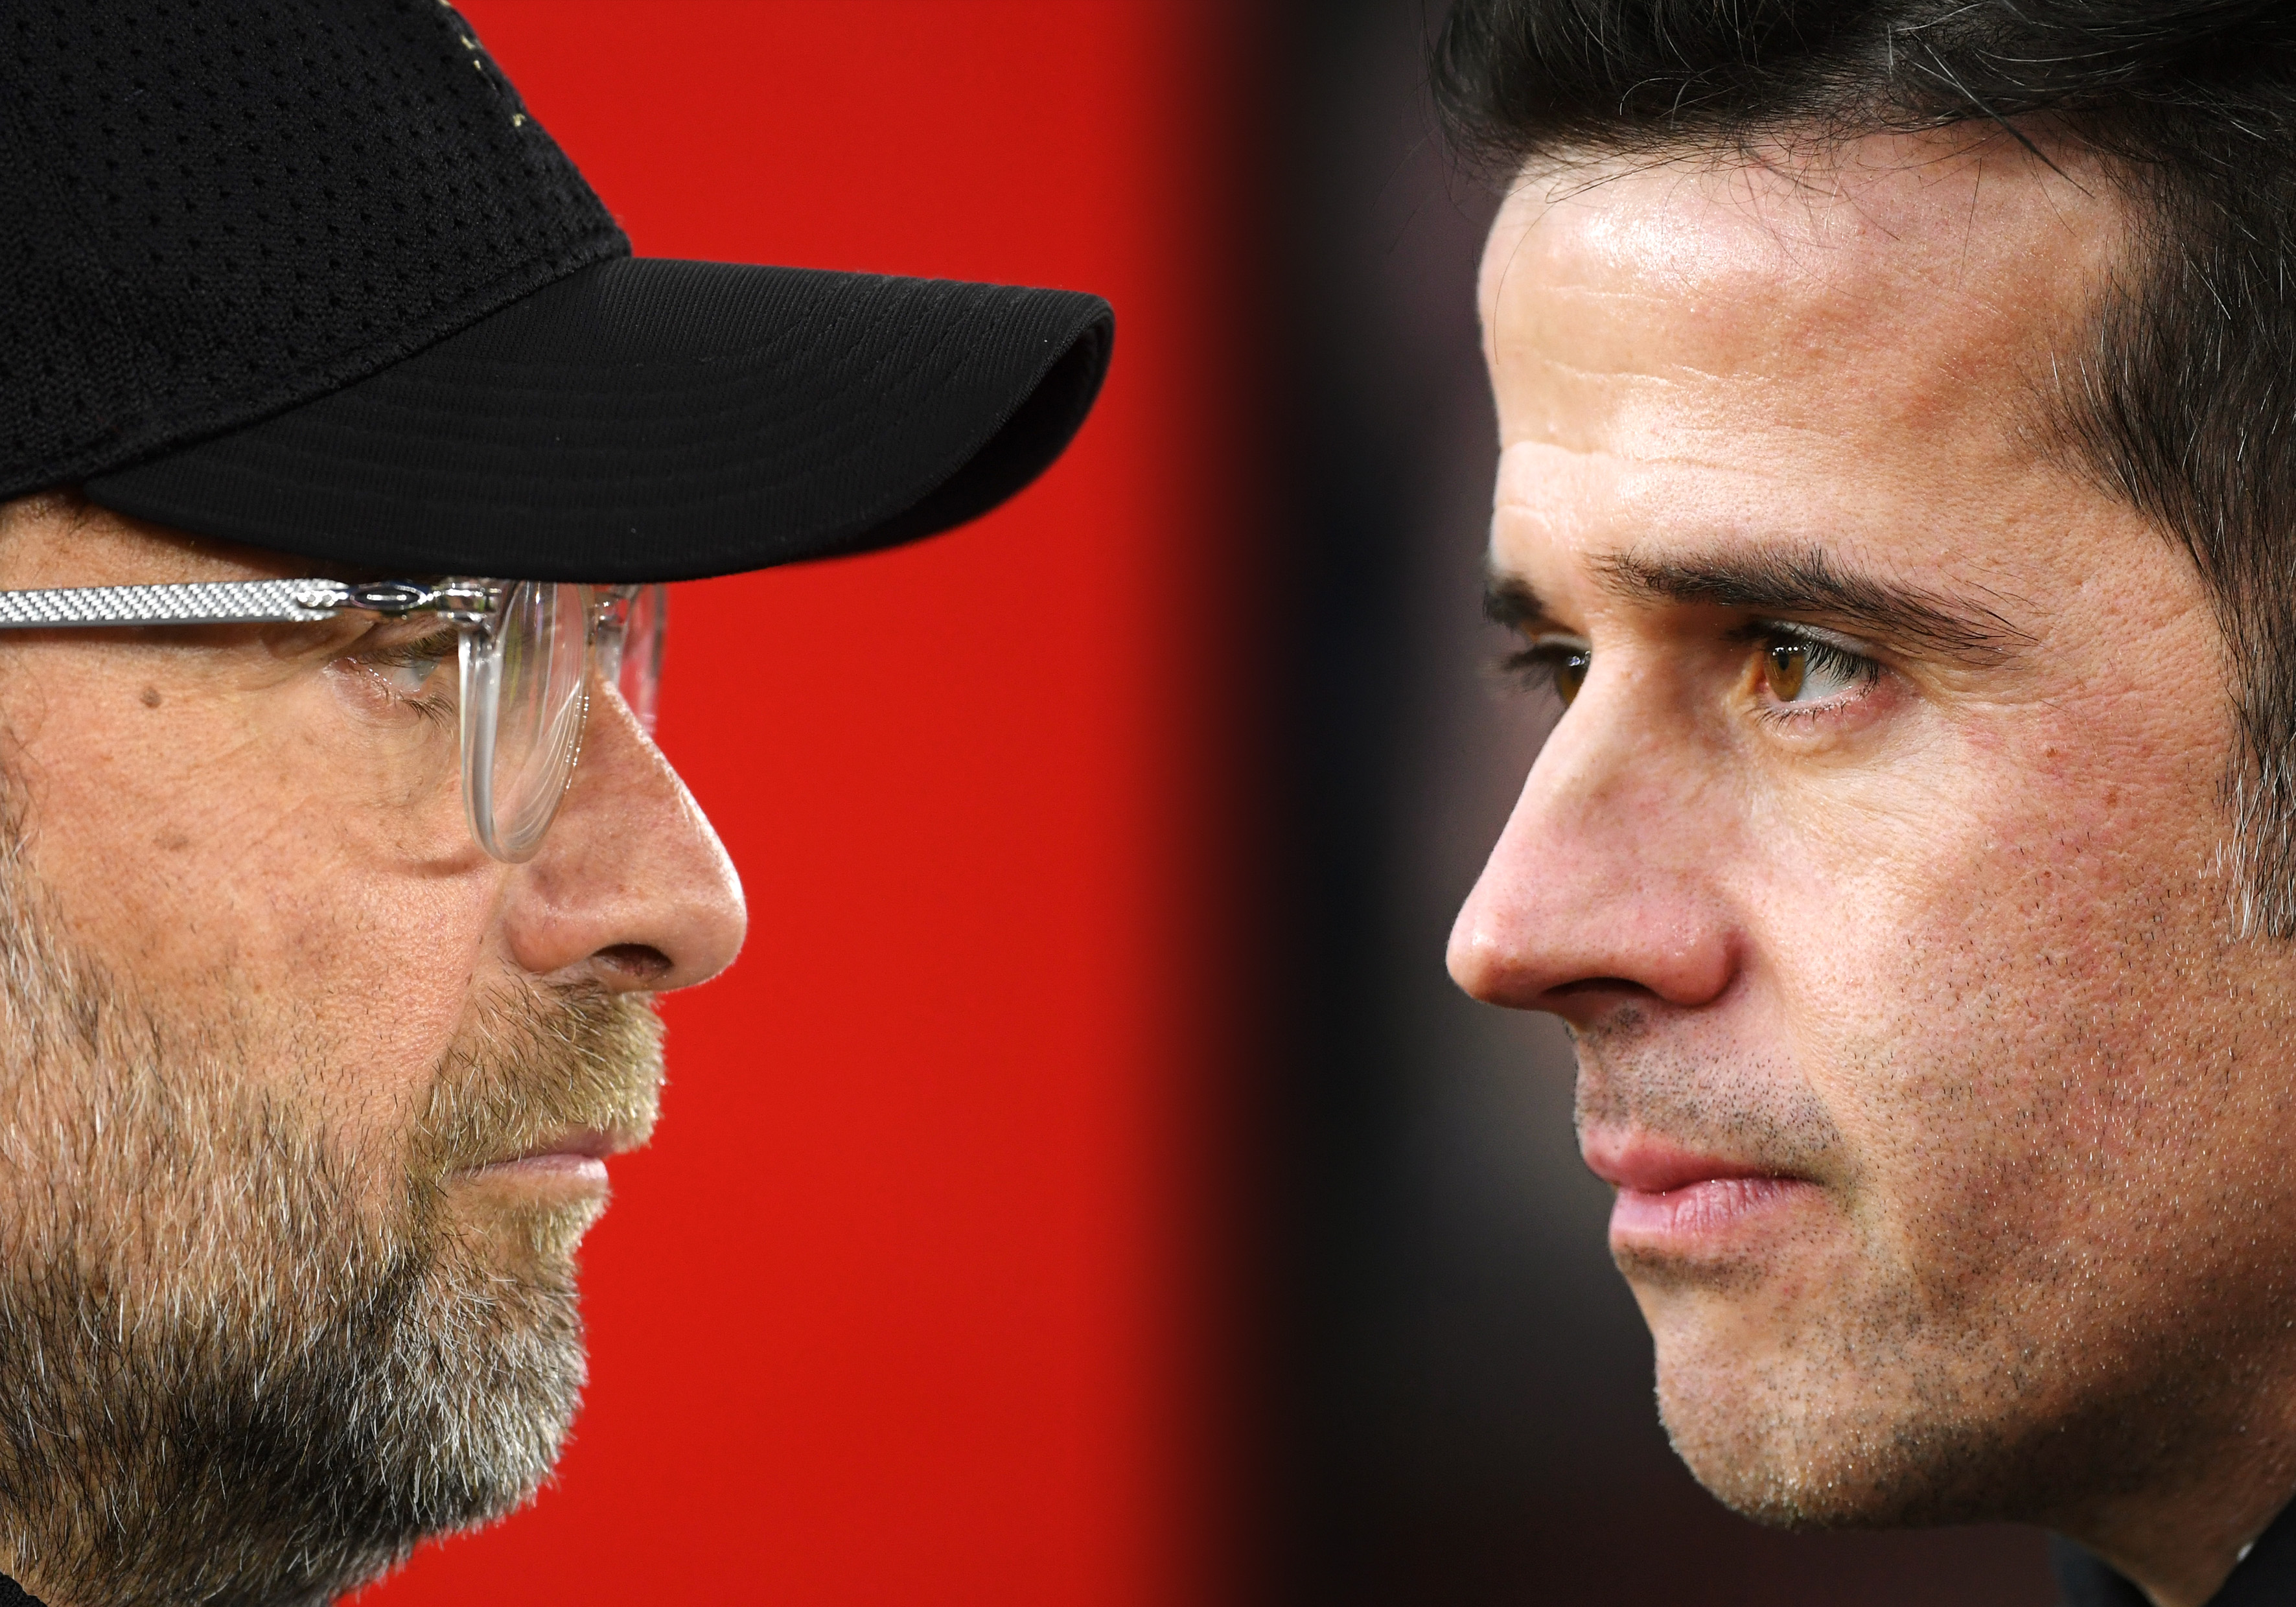 FILE PHOTO (EDITORS NOTE: COMPOSITE OF IMAGES - Image numbers 1140640499,1075101536 - GRADIENT ADDED) In this composite image a comparison has been made between Jurgen Klopp, Manager of Liverpool (L) and Everton manager Marco Silva. Liverpool and Everton will meet in the Merseyside Derby on December 4,2019 in Liverpool,England.  ***LEFT IMAGE*** SOUTHAMPTON, ENGLAND - APRIL 05: Jurgen Klopp, Manager of Liverpool looks on prior to the Premier League match between Southampton FC and Liverpool FC at St Mary's Stadium on April 05, 2019 in Southampton, United Kingdom. (Photo by Mike Hewitt/Getty Images) ***RIGHT IMAGE*** BURNLEY, ENGLAND - DECEMBER 26: Everton manager Marco Silva looks on from the touchline during the Premier League match between Burnley FC and Everton FC at Turf Moor on December 26, 2018 in Burnley, United Kingdom. (Photo by Stu Forster/Getty Images)